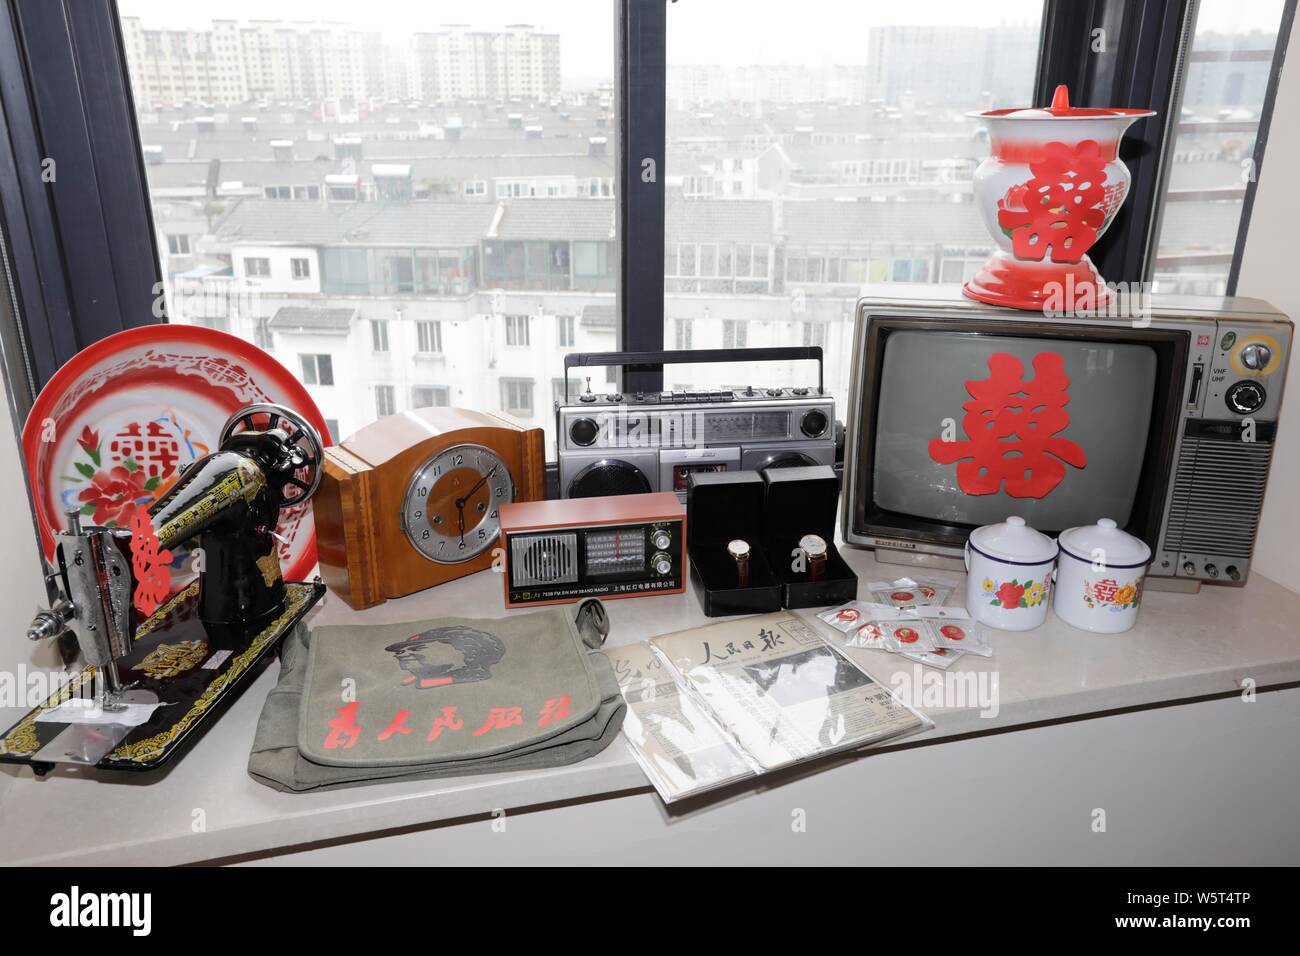 An old-fashioned radio, a sewing machine, wrist watches and other items are displayed during a wedding ceremony in Suzhou city, east China's Jiangsu p Stock Photo